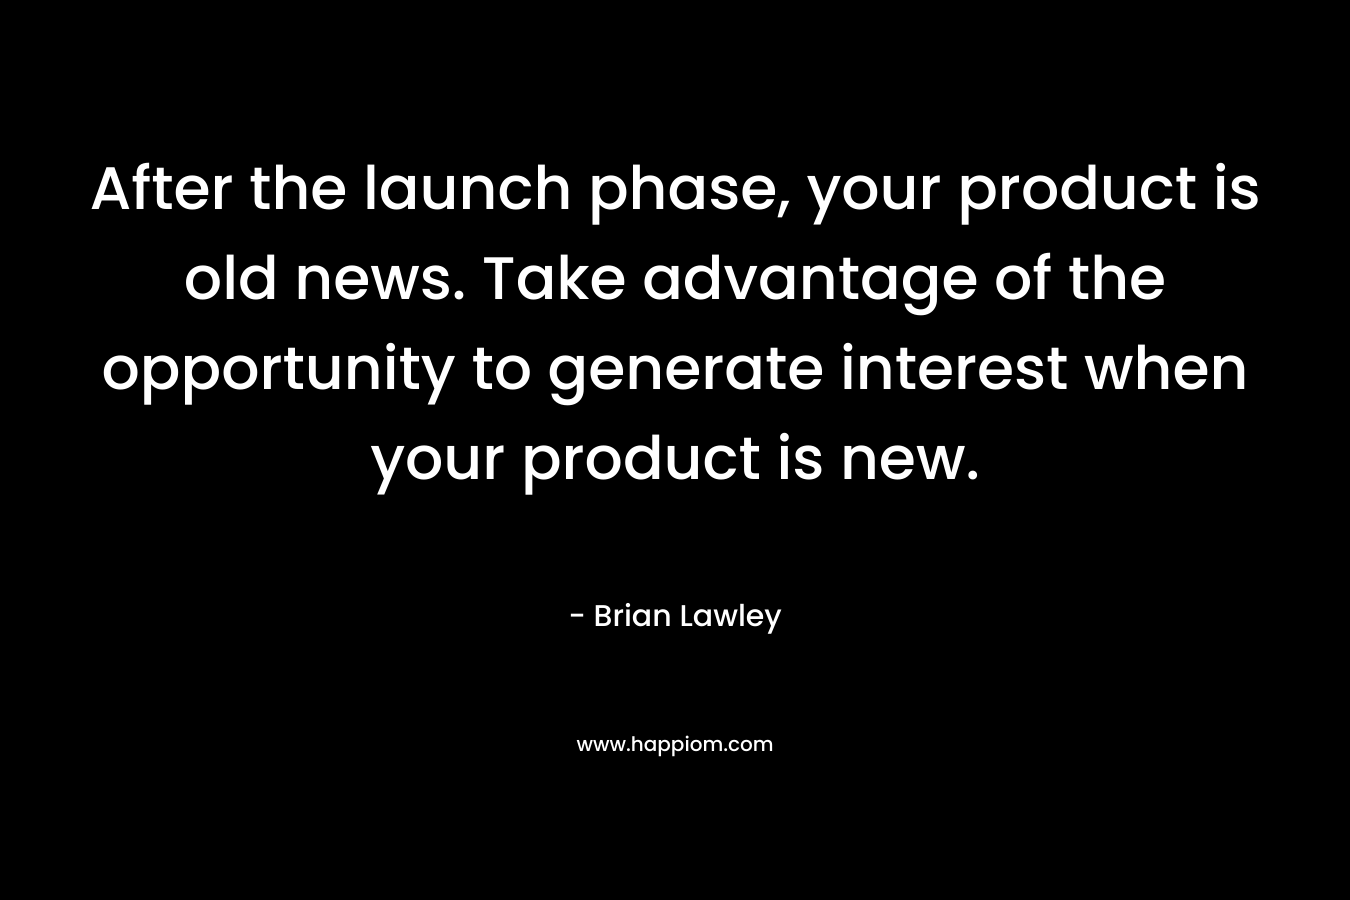 After the launch phase, your product is old news. Take advantage of the opportunity to generate interest when your product is new.